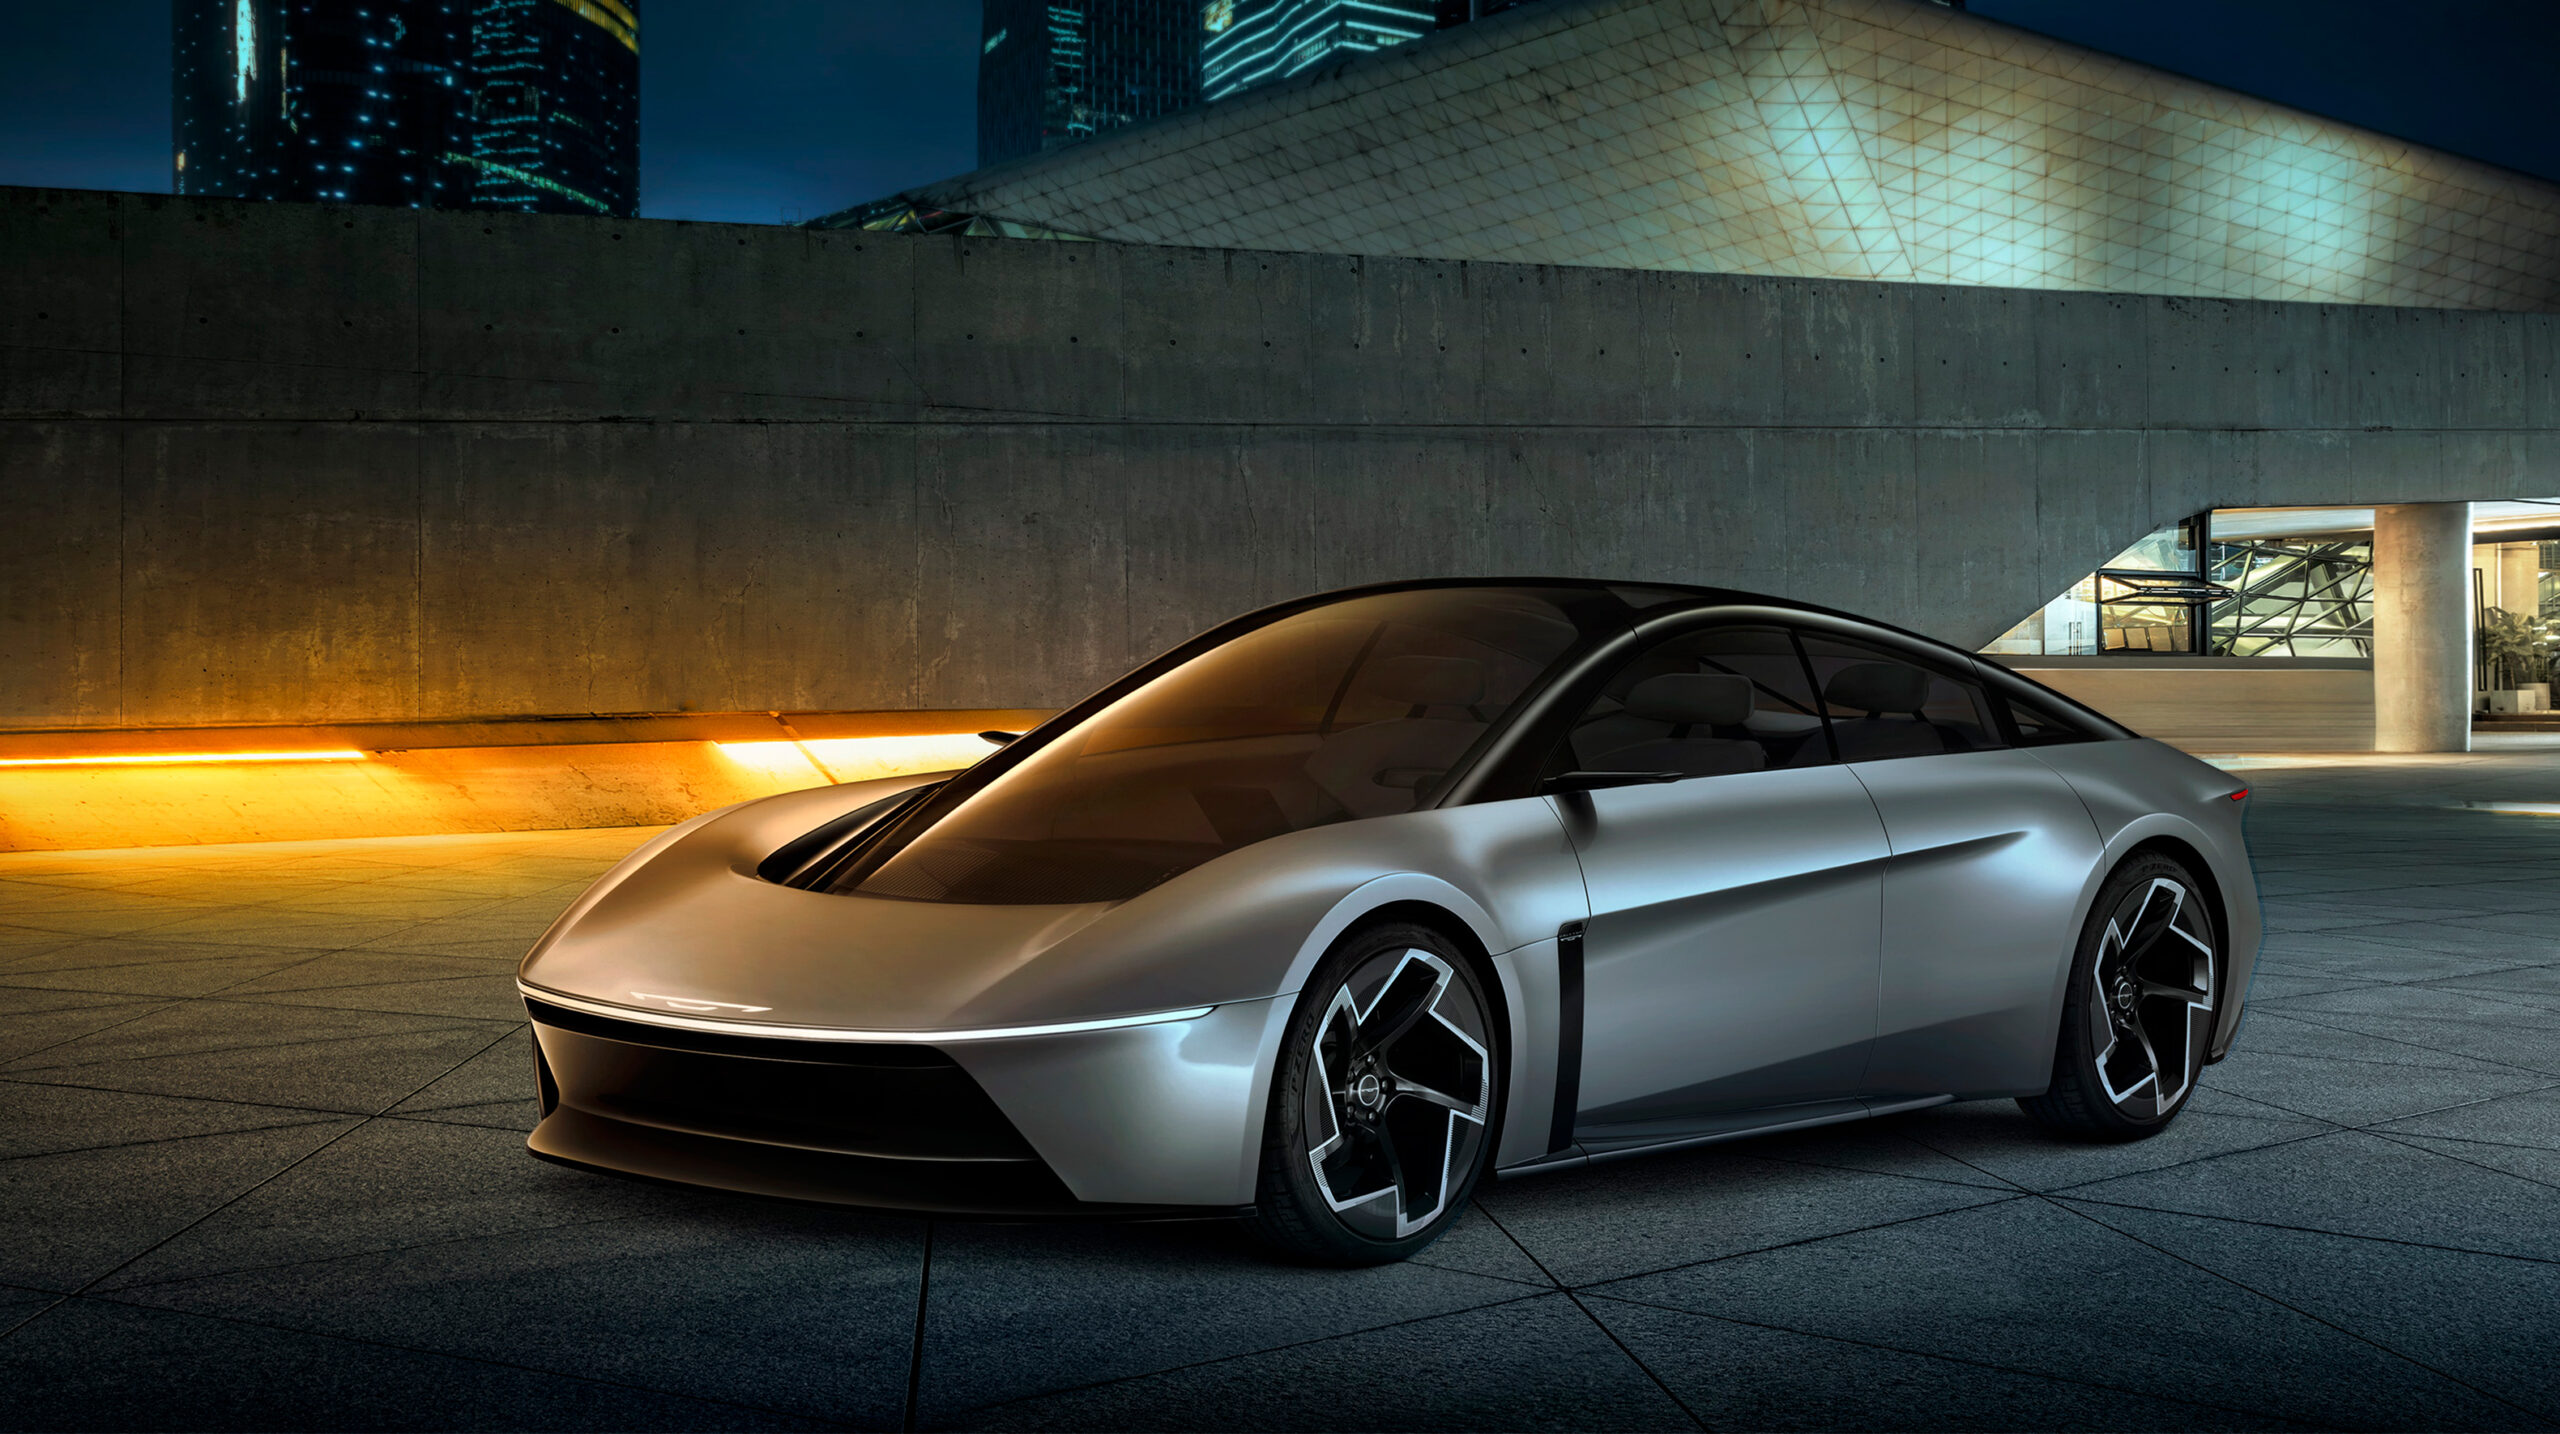 Chrysler Halcyon Concept: Shaping the All-Electric Vision for the Future